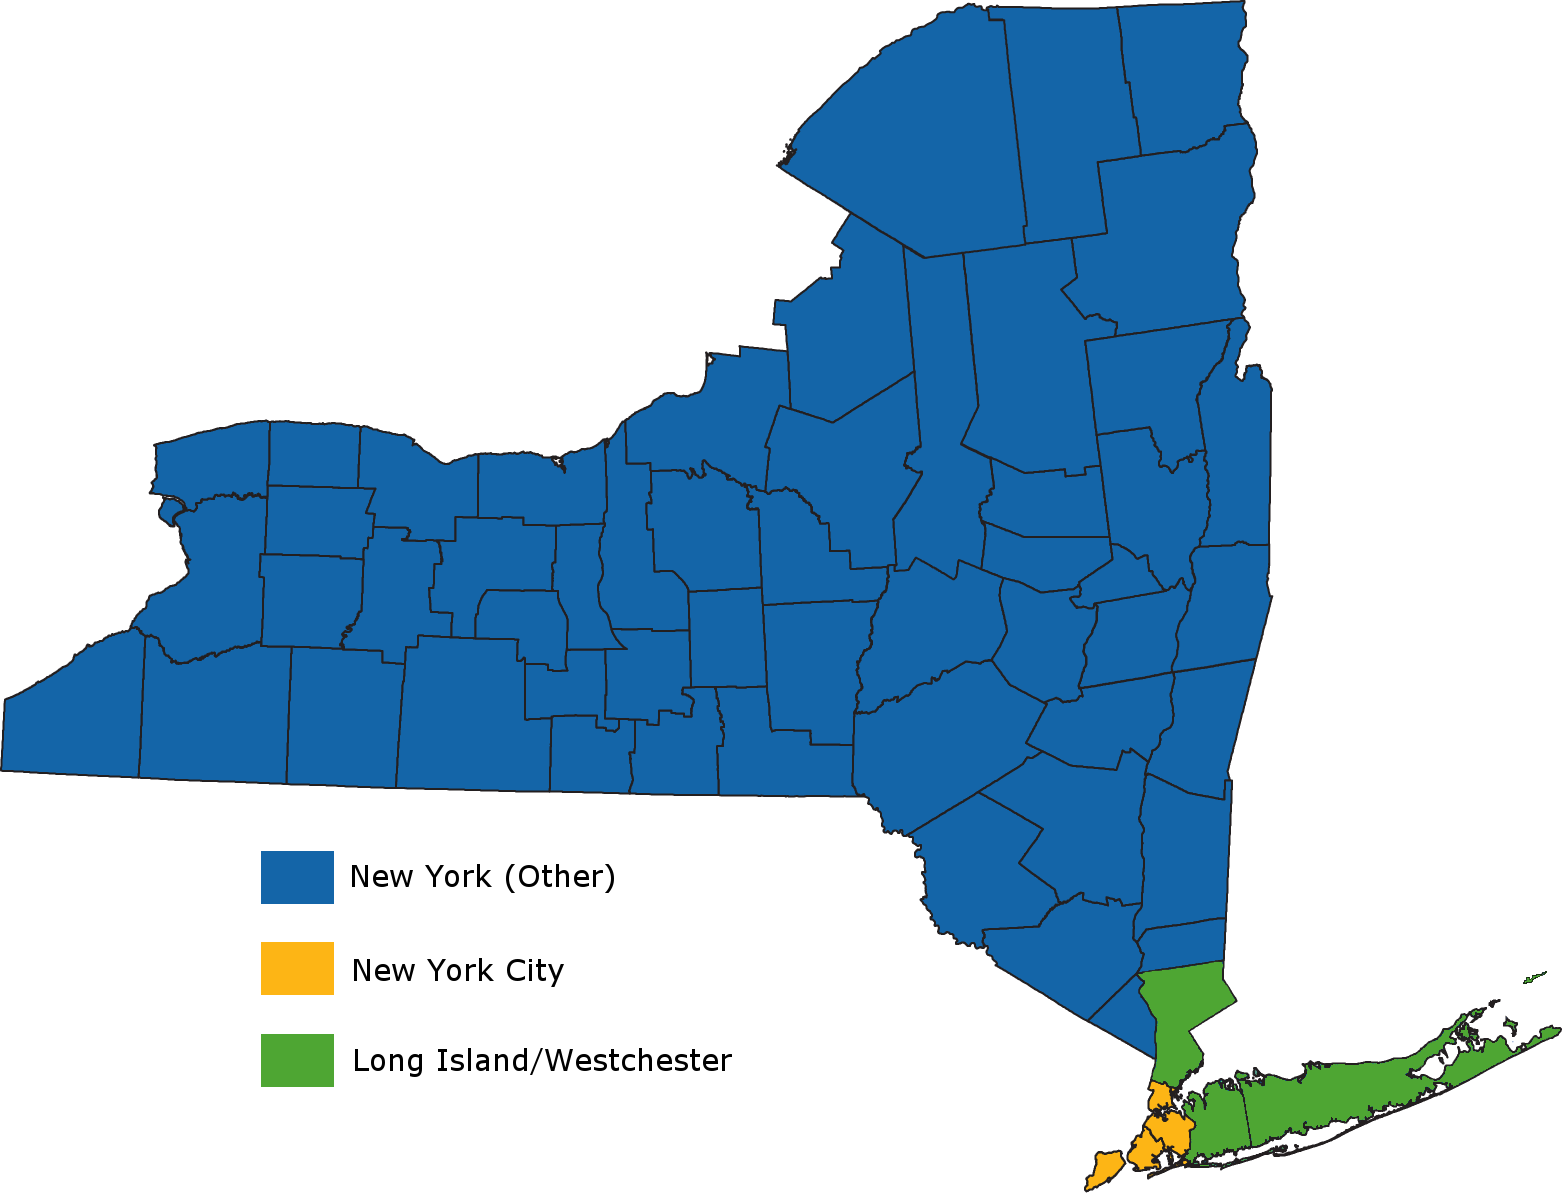 A map showing New York City, Long Island/Westchester, and the rest of New York State